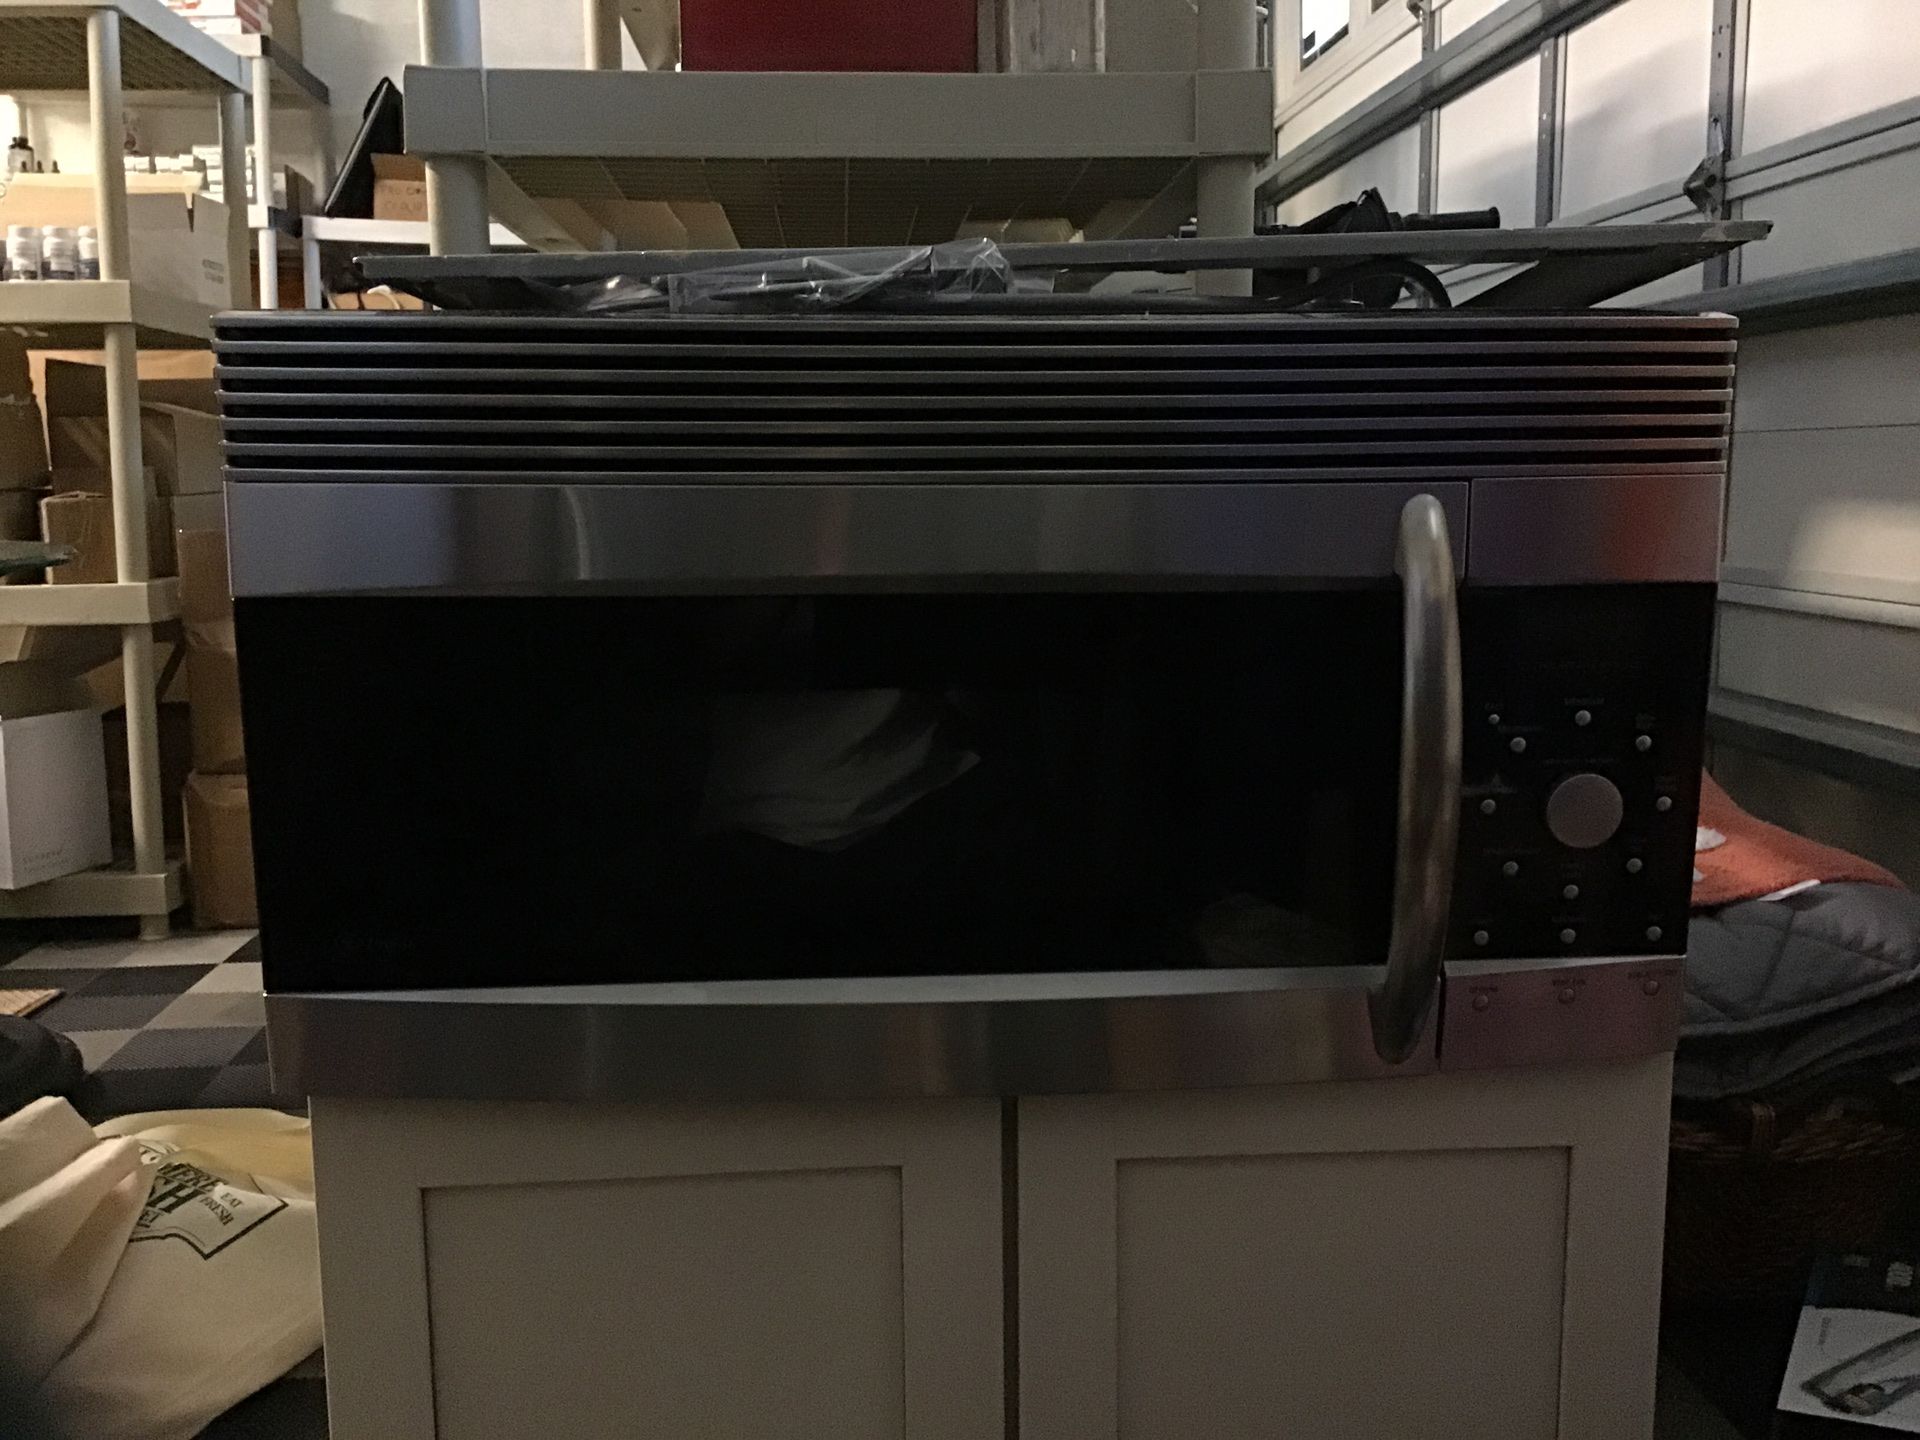 GE Advantium 120 oven and microwave